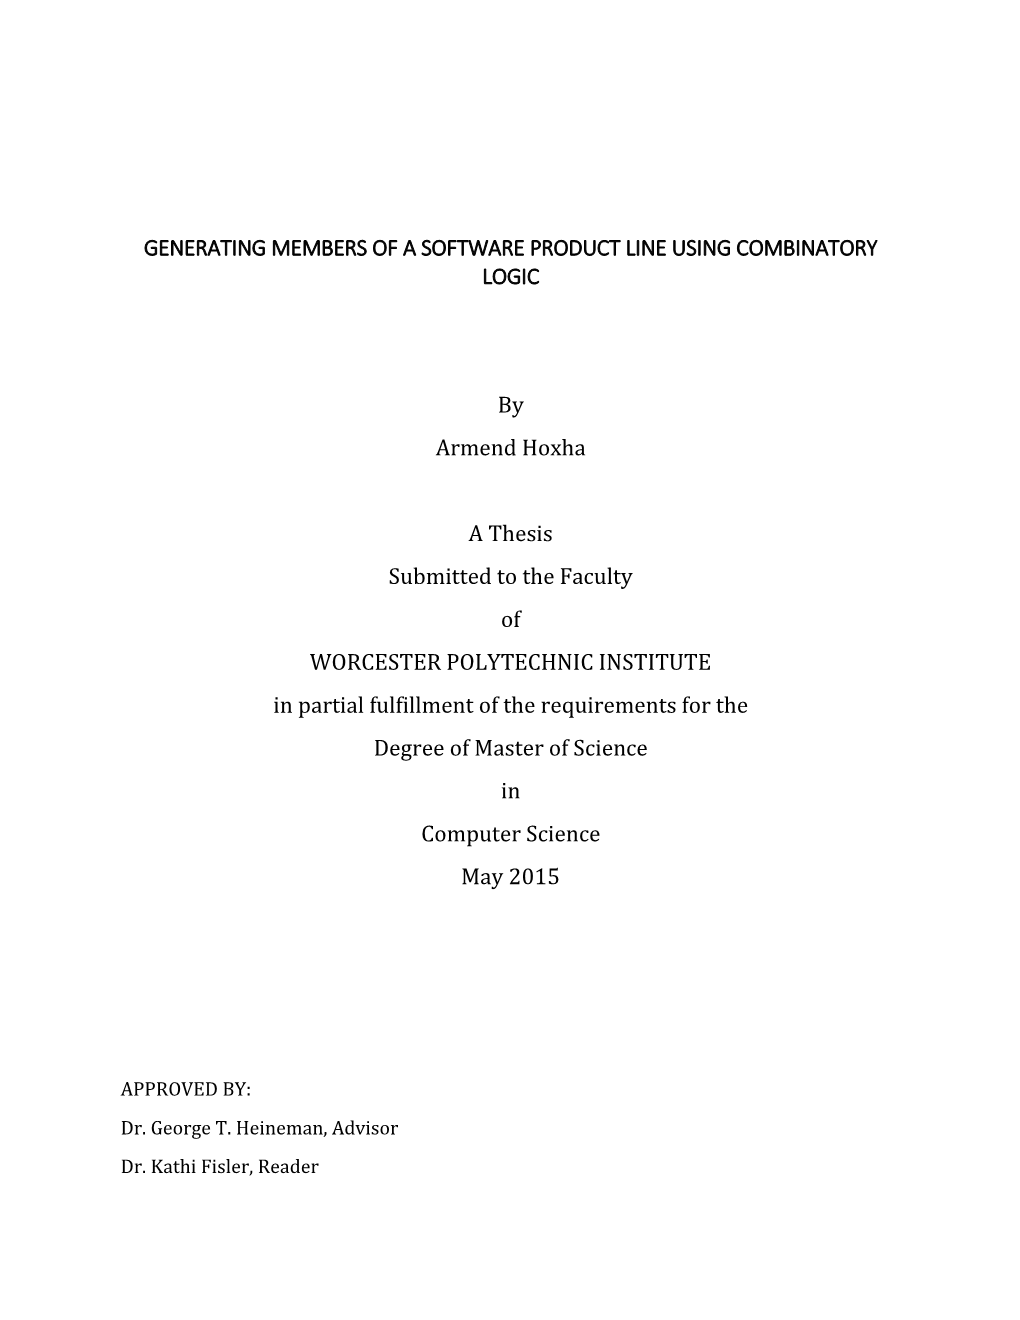 GENERATING MEMBERS of a SOFTWARE PRODUCT LINE USING COMBINATORY LOGIC by Armend Hoxha a Thesis Submitted to the Faculty of WORC